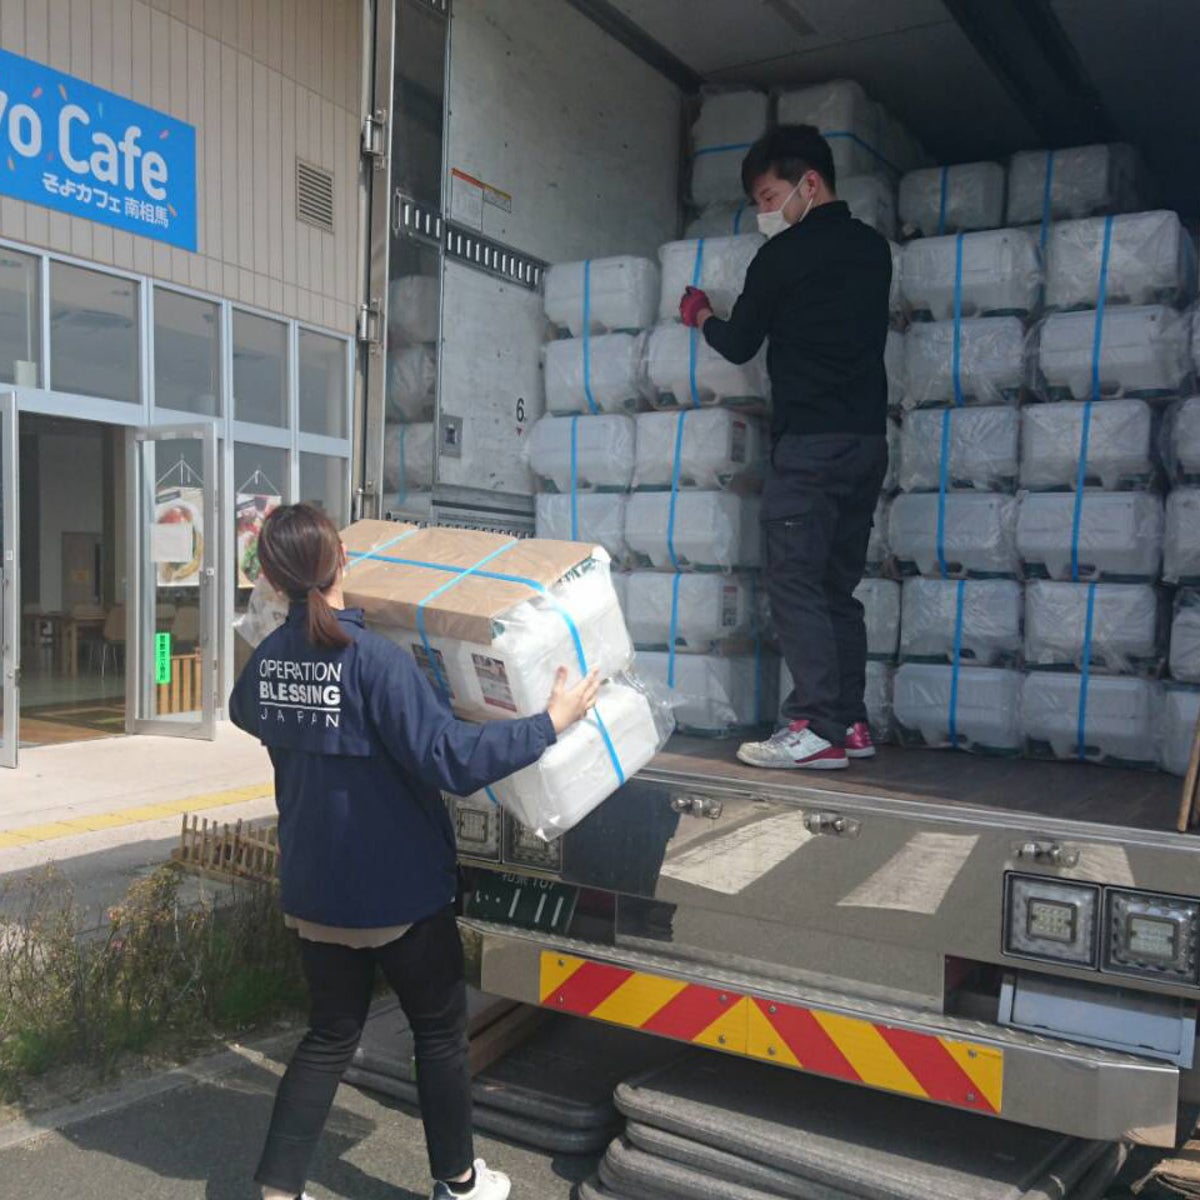 A truckload of disinfecting chlorine to bless the vulnerable in Japan during COVID-19.